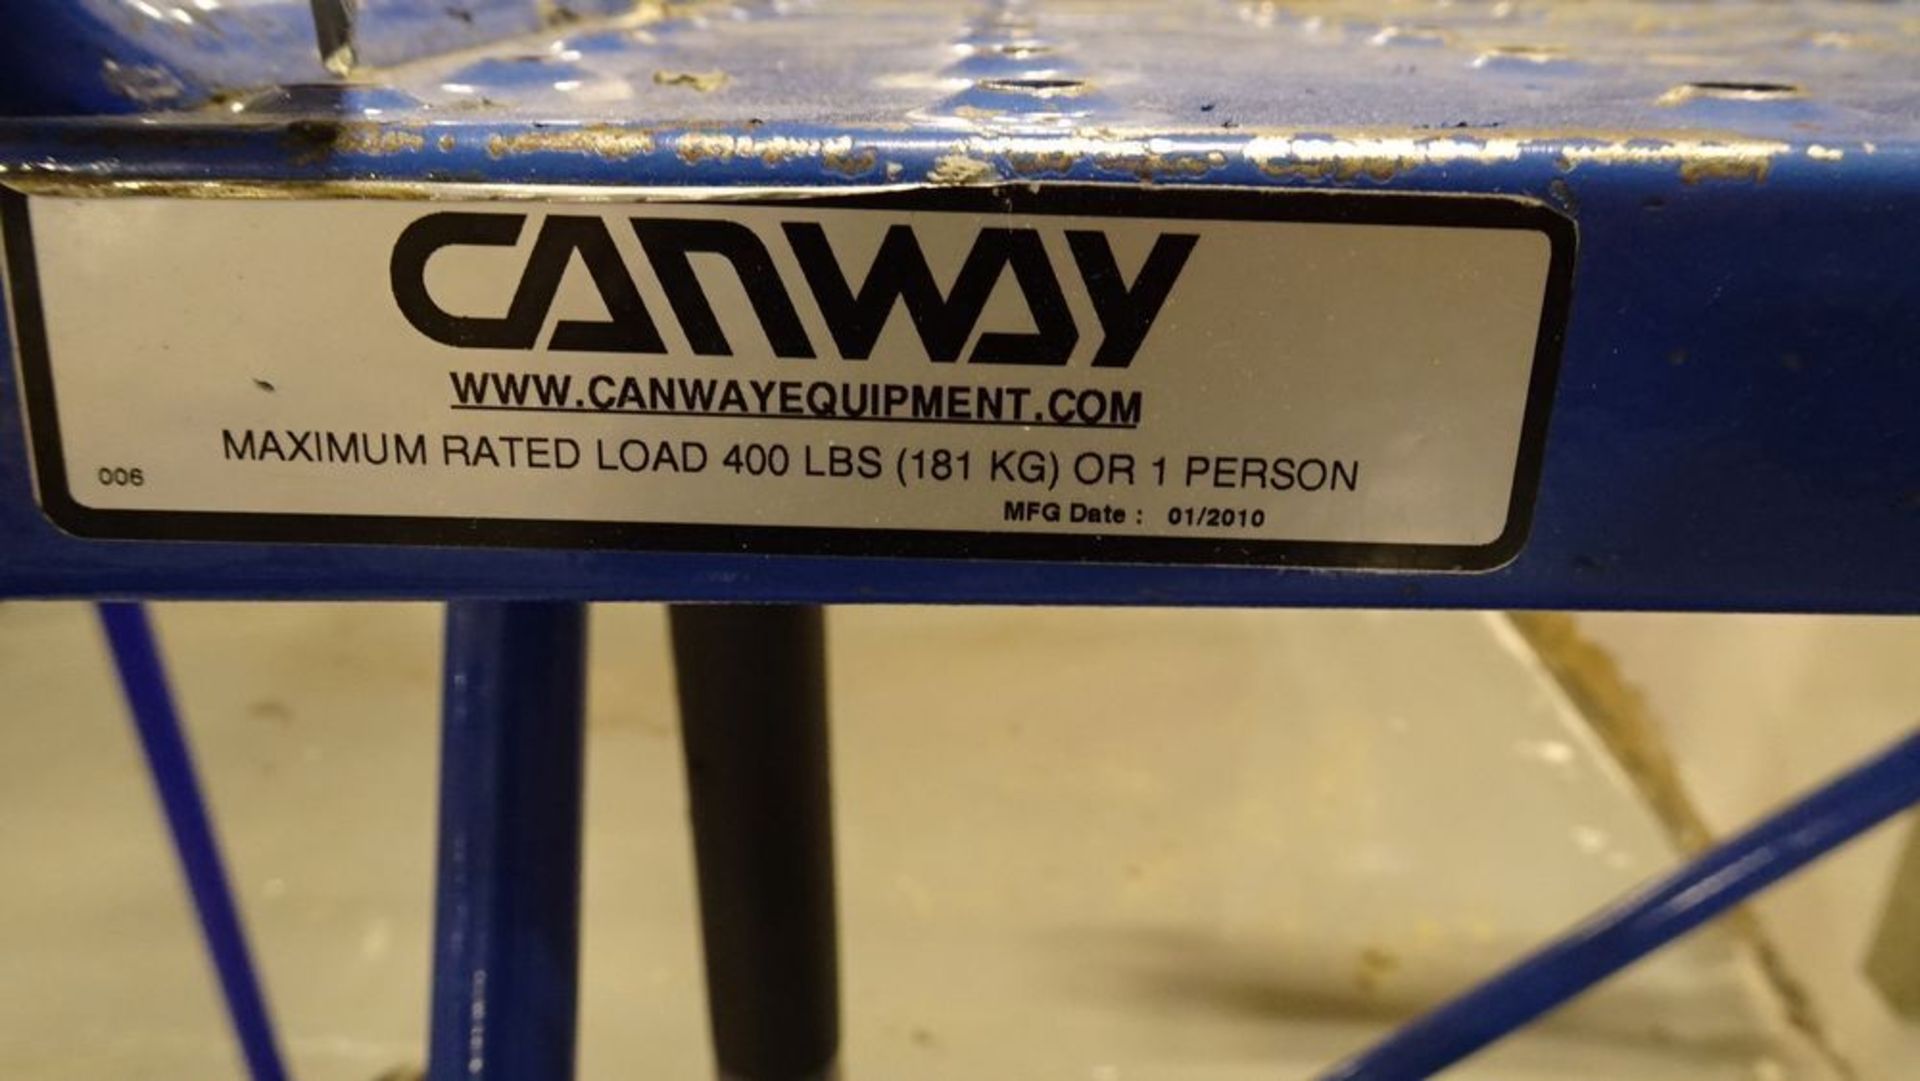 2010 CANWAY 4-STEP WAREHOUSE LADDER (REUTER) - Image 2 of 2